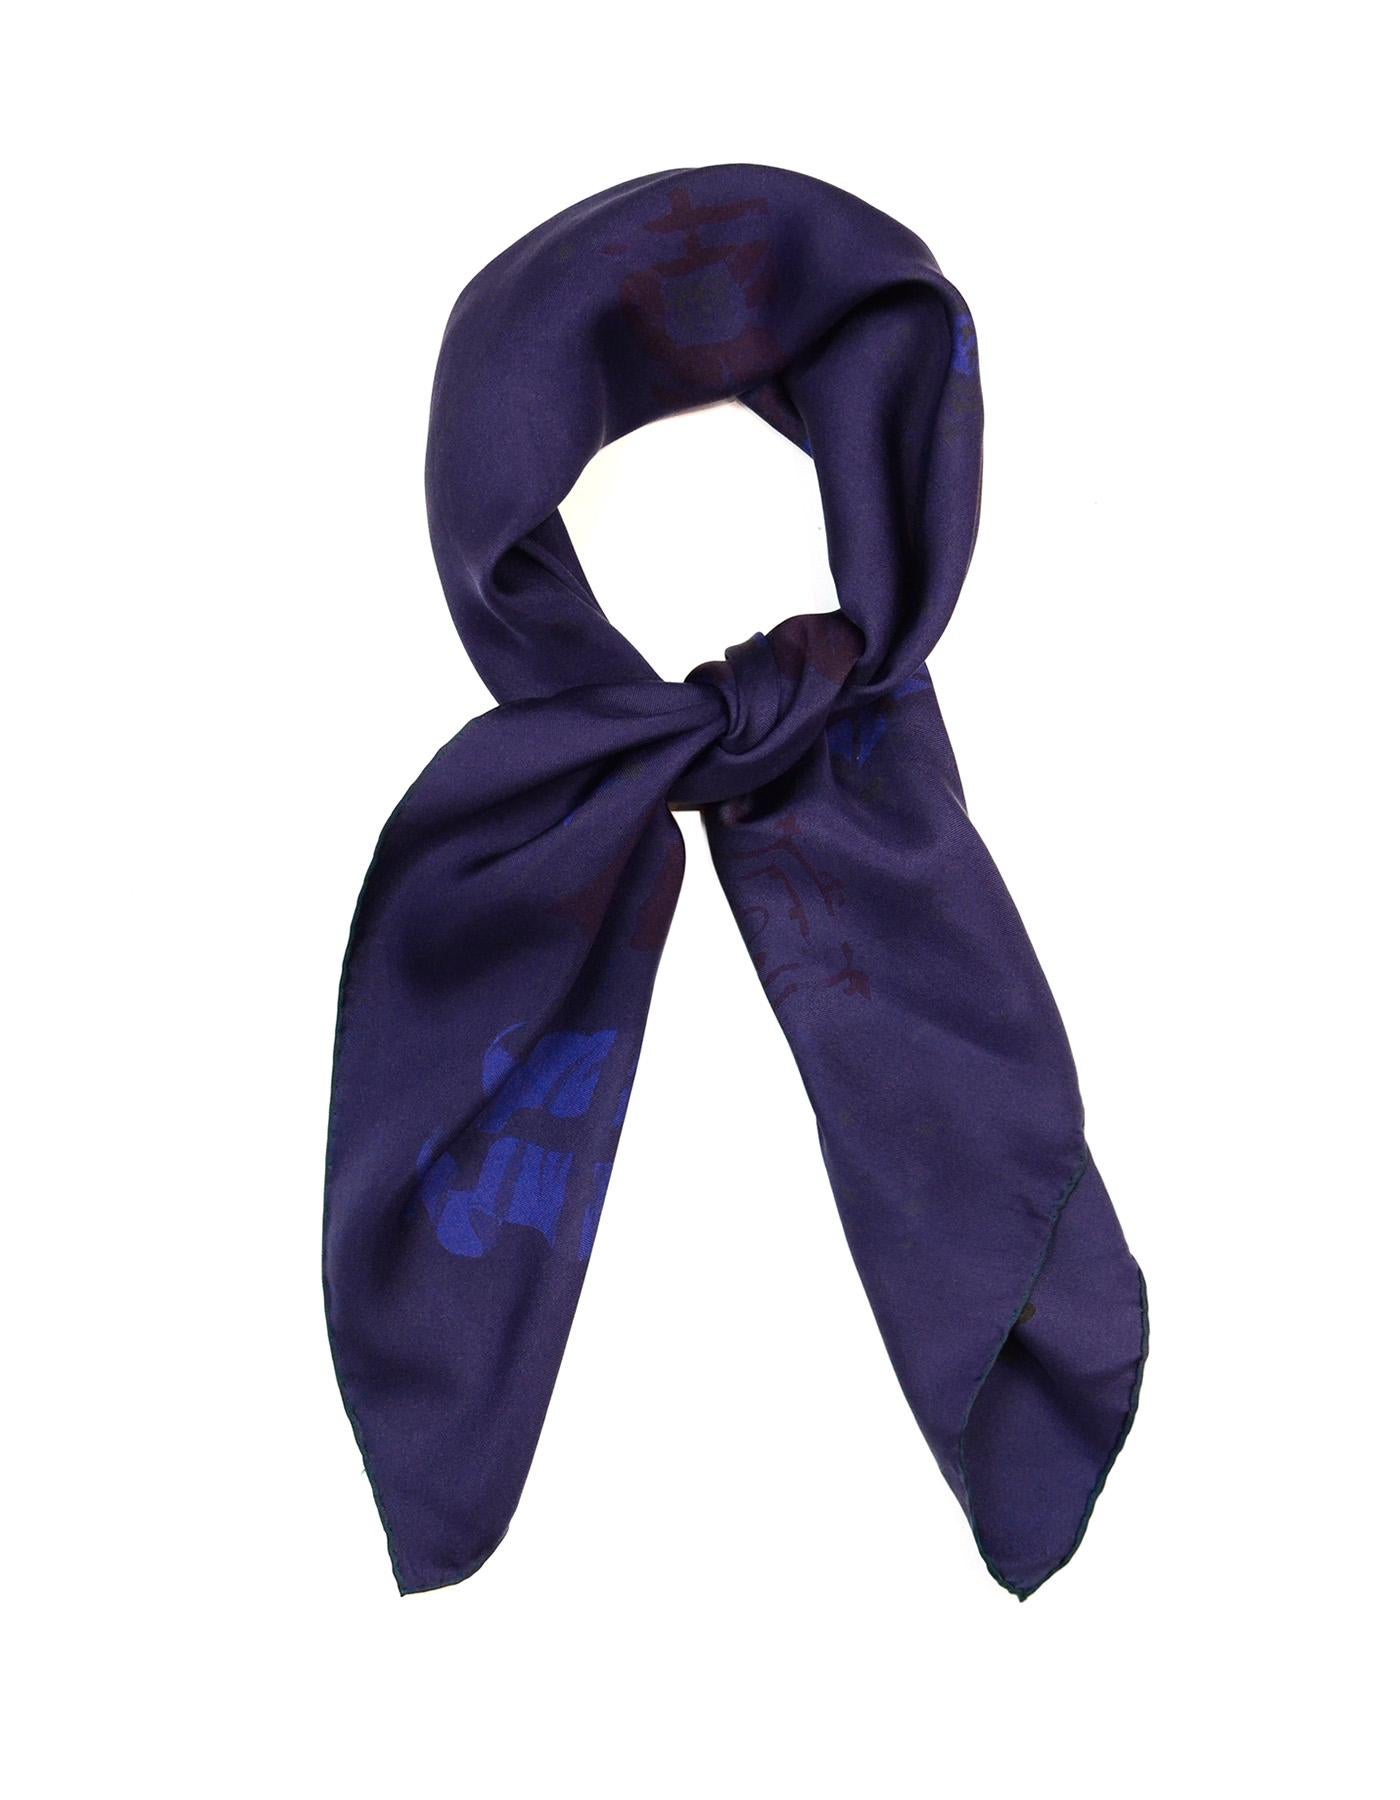 Hermes Dark Blue Pavois Dip Dye Silk Scarf 

Made In: France
Color: Dark blue/purple
Materials: 100% silk
Overall Condition: Excellent pre-owned condition

Measurements: 
35